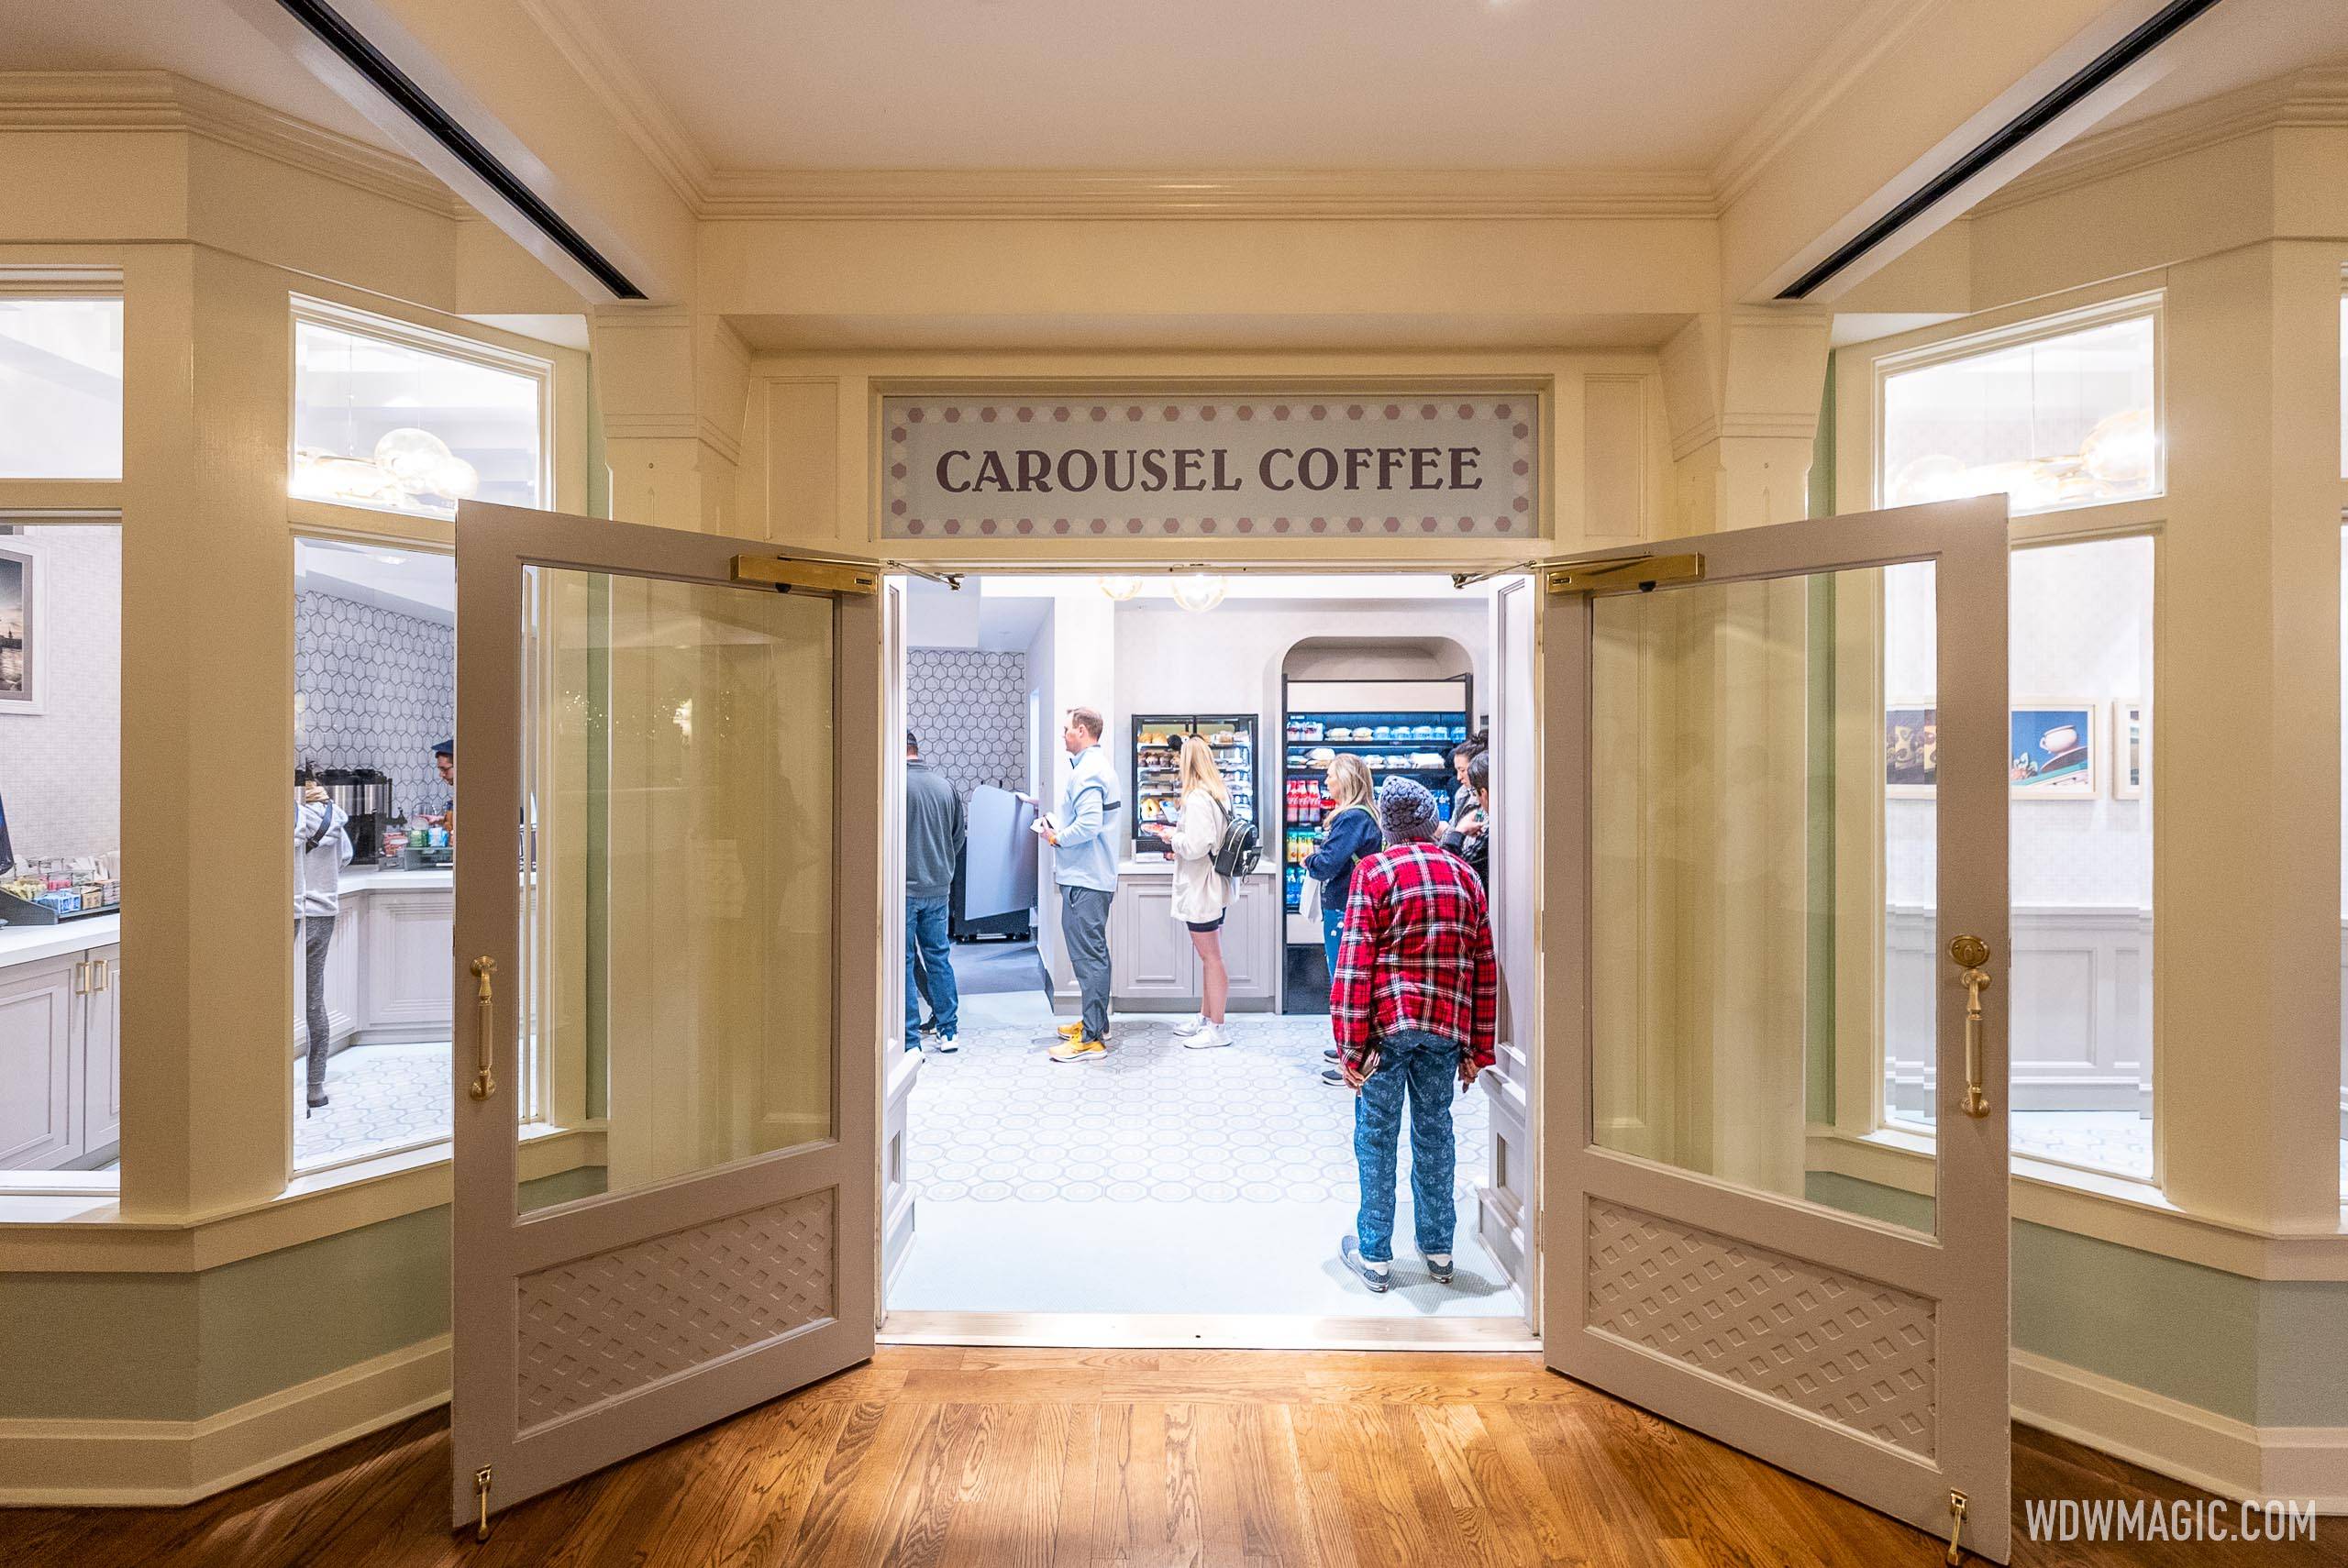 Carousel Coffee overview